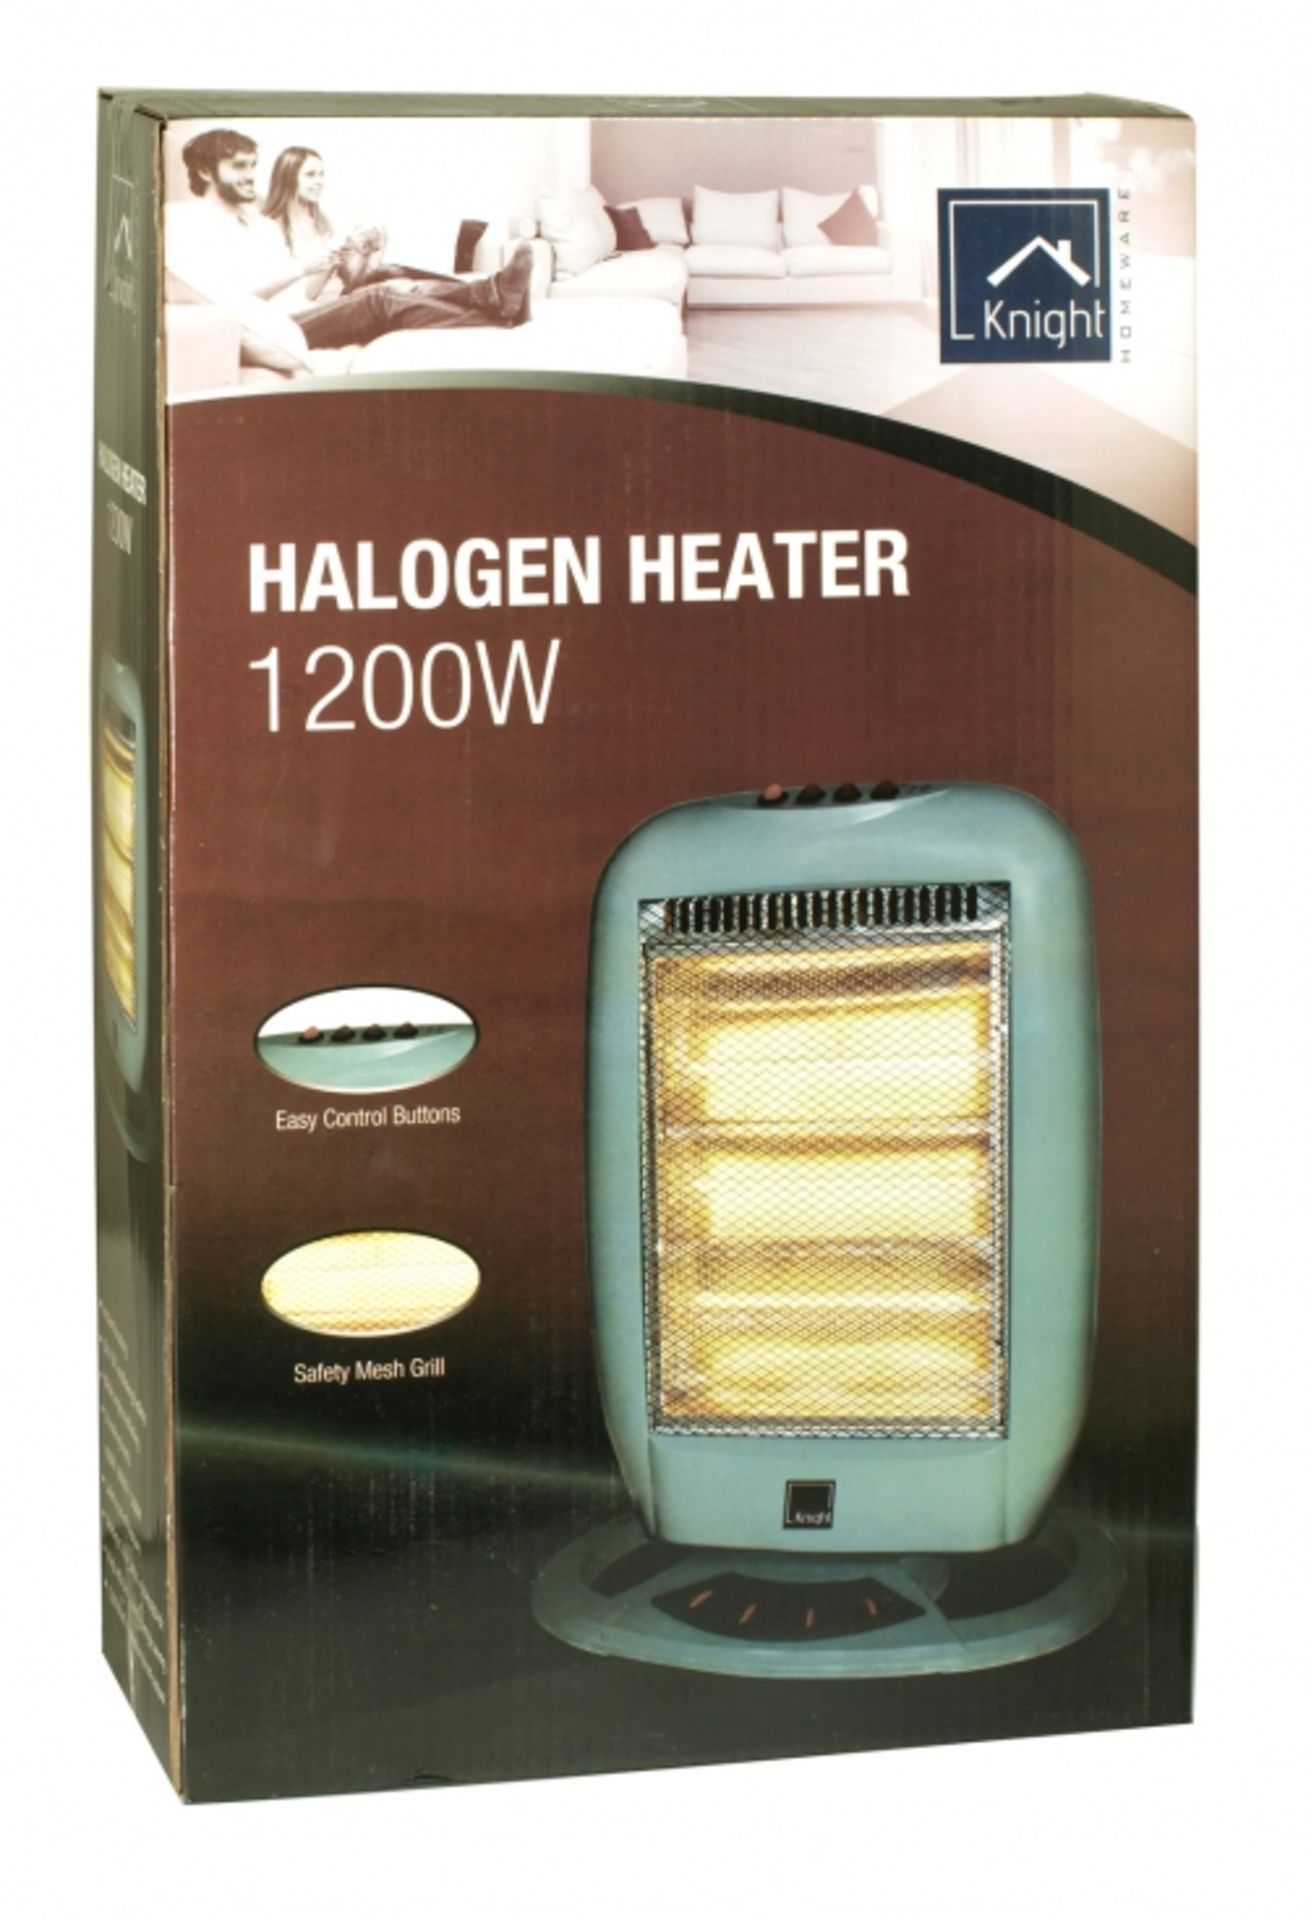 V Brand New 1200W Halogen Heater With Oscillating Feature - Easy Control Buttons and Safety Mesh